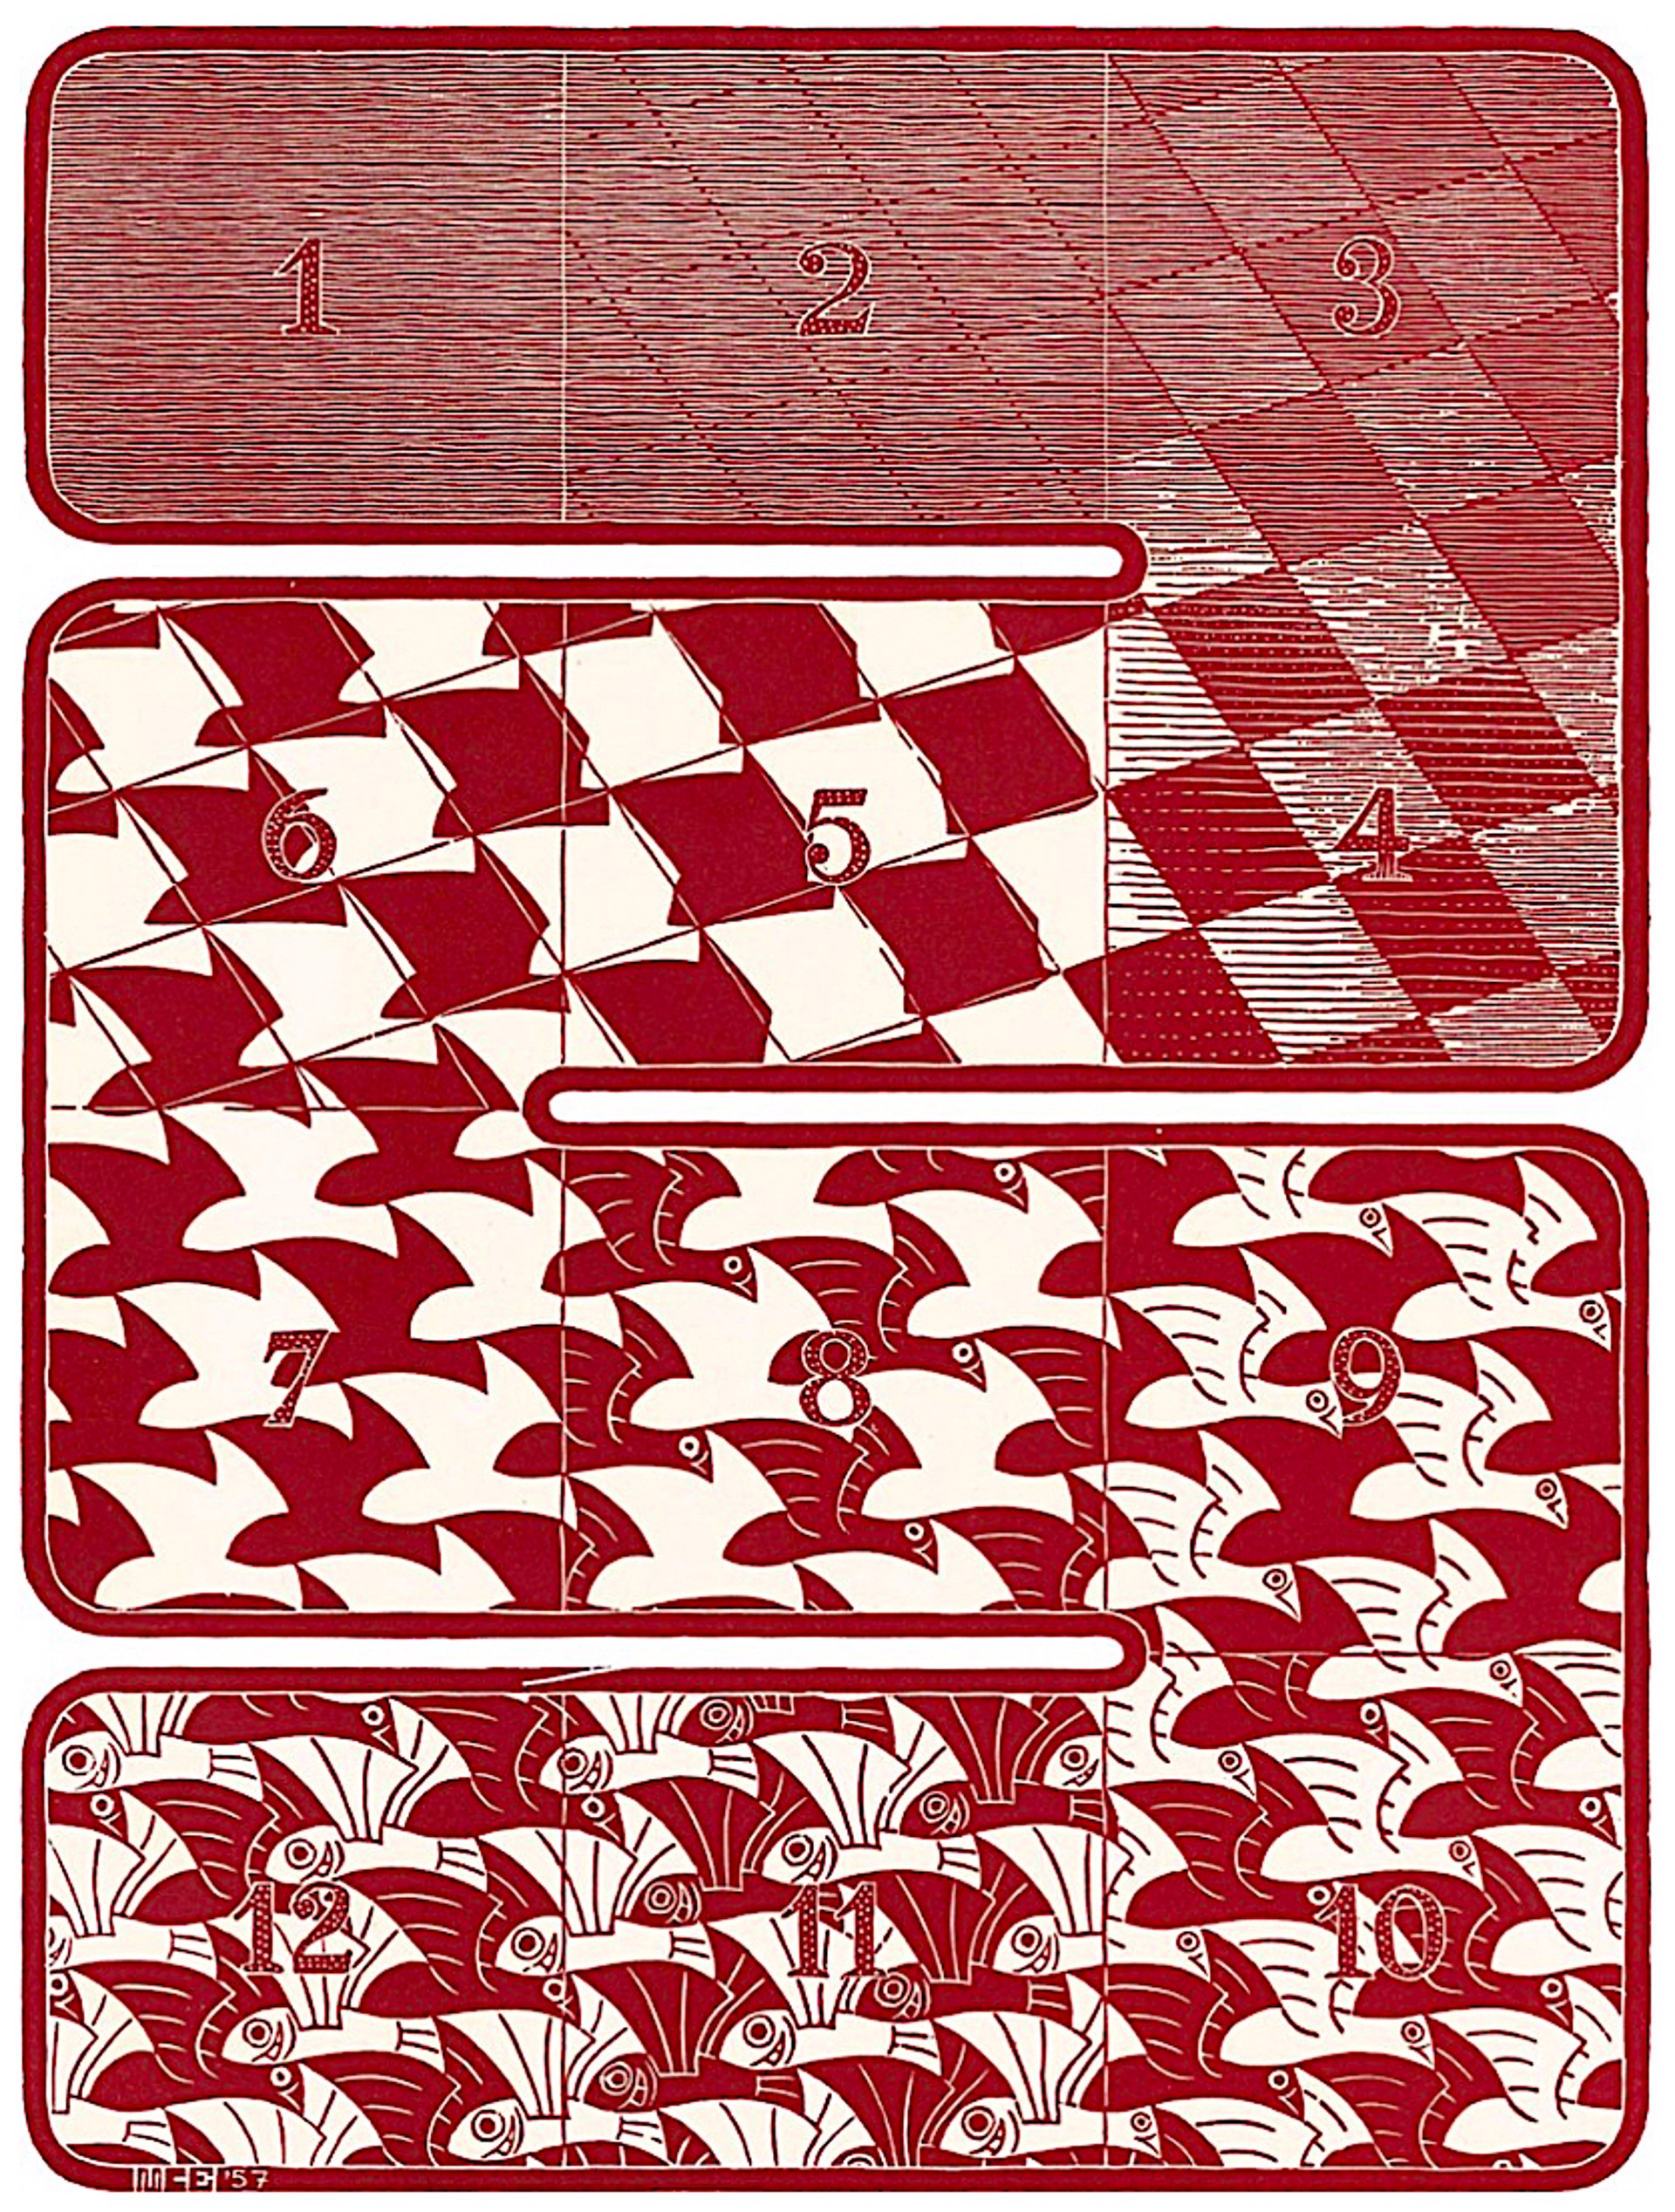 Regular Division of the Plane I Red by M.C. Escher